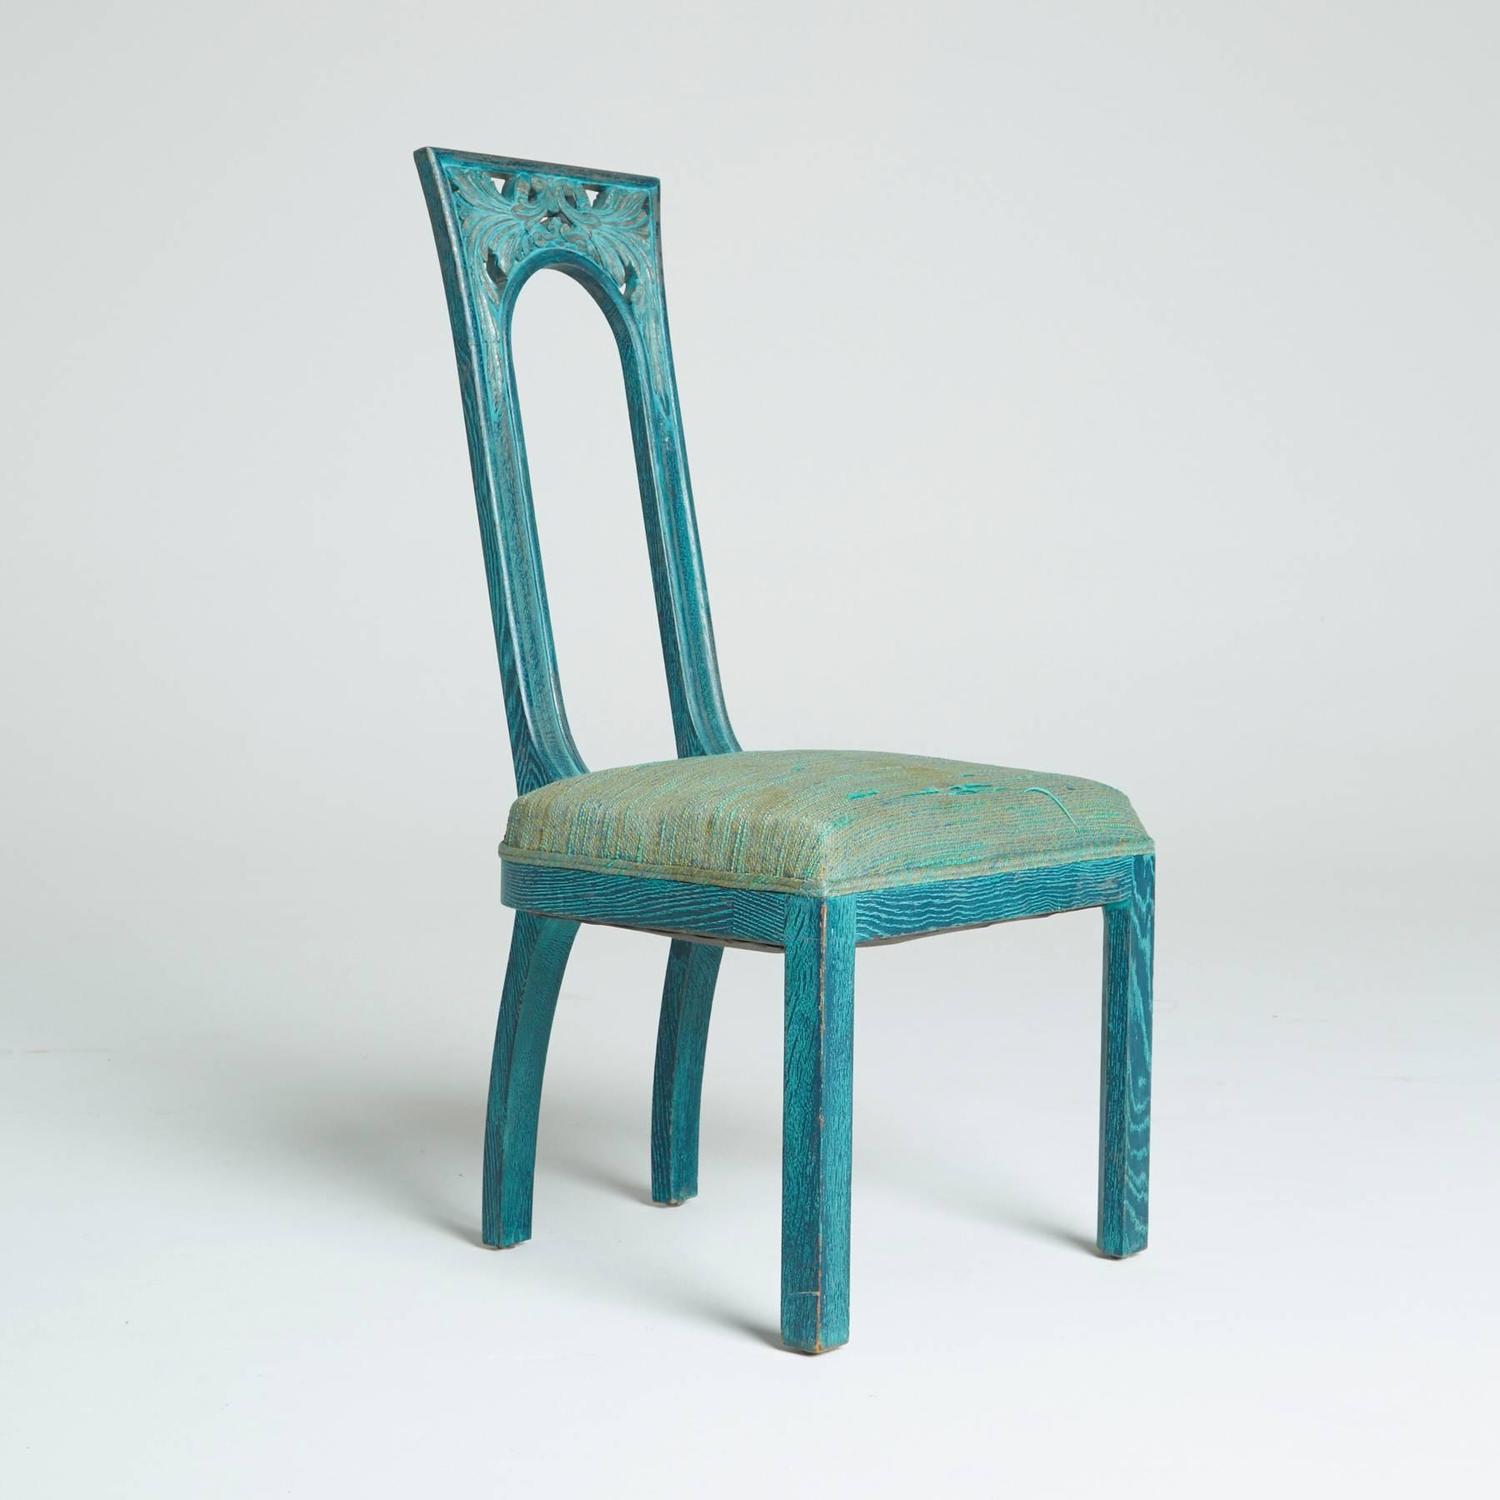 Set of Eight Carved Green Blue Dining Chairs by James Mont,1940s at 1stdibs